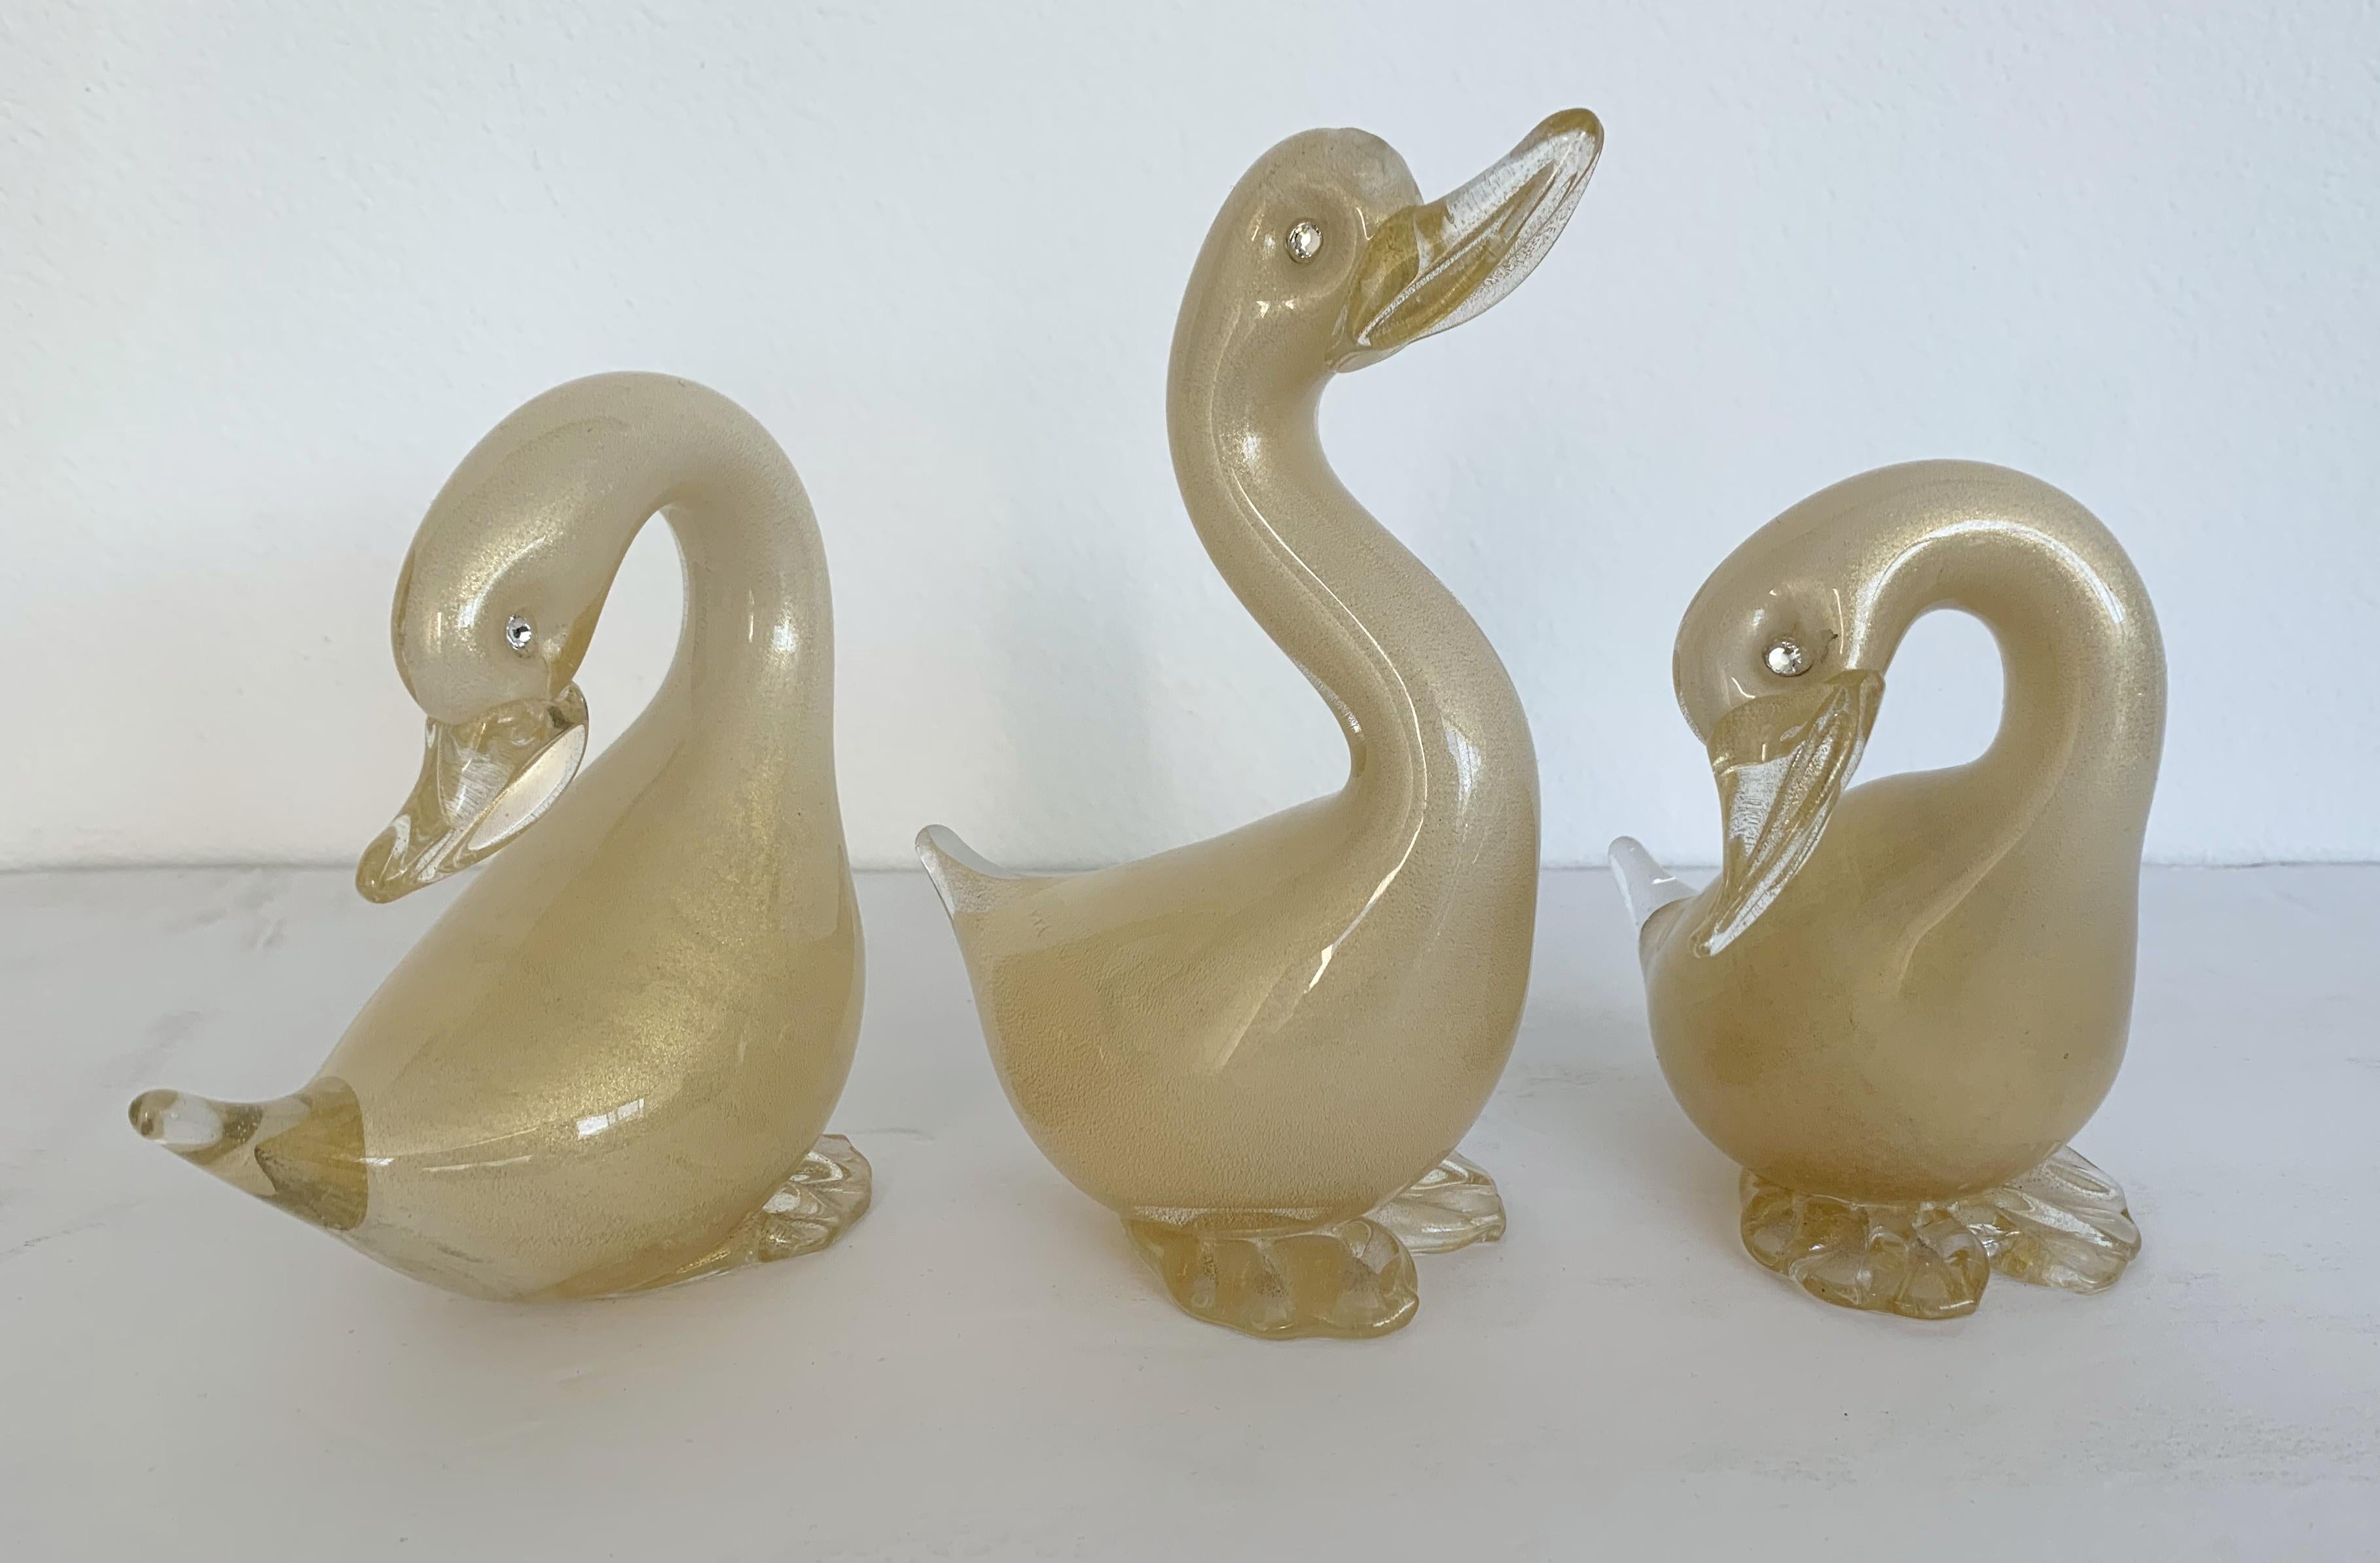 Set of 3 vintage hand blown Murano glass ducks infused with gold flecks, with Swarovski crystal eyes / Made in Italy, circa 1980s
